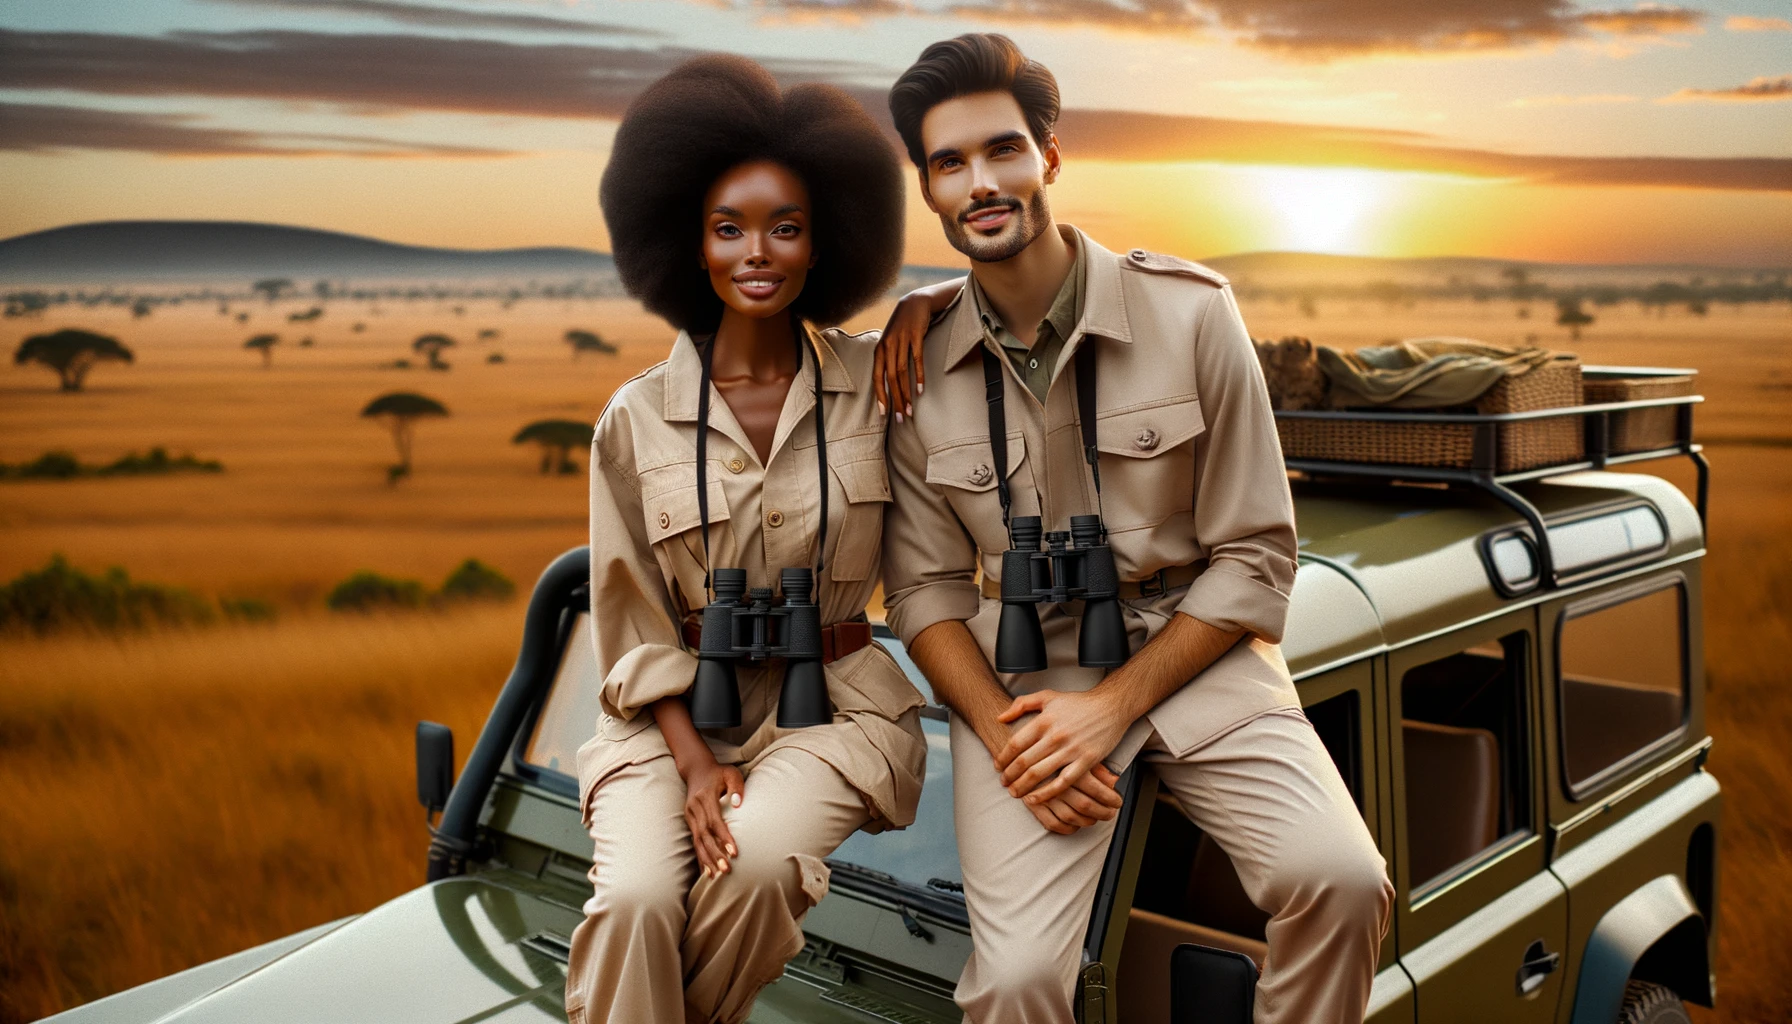 A stunning photograph of a couple standing on a safari jeep, with a backdro